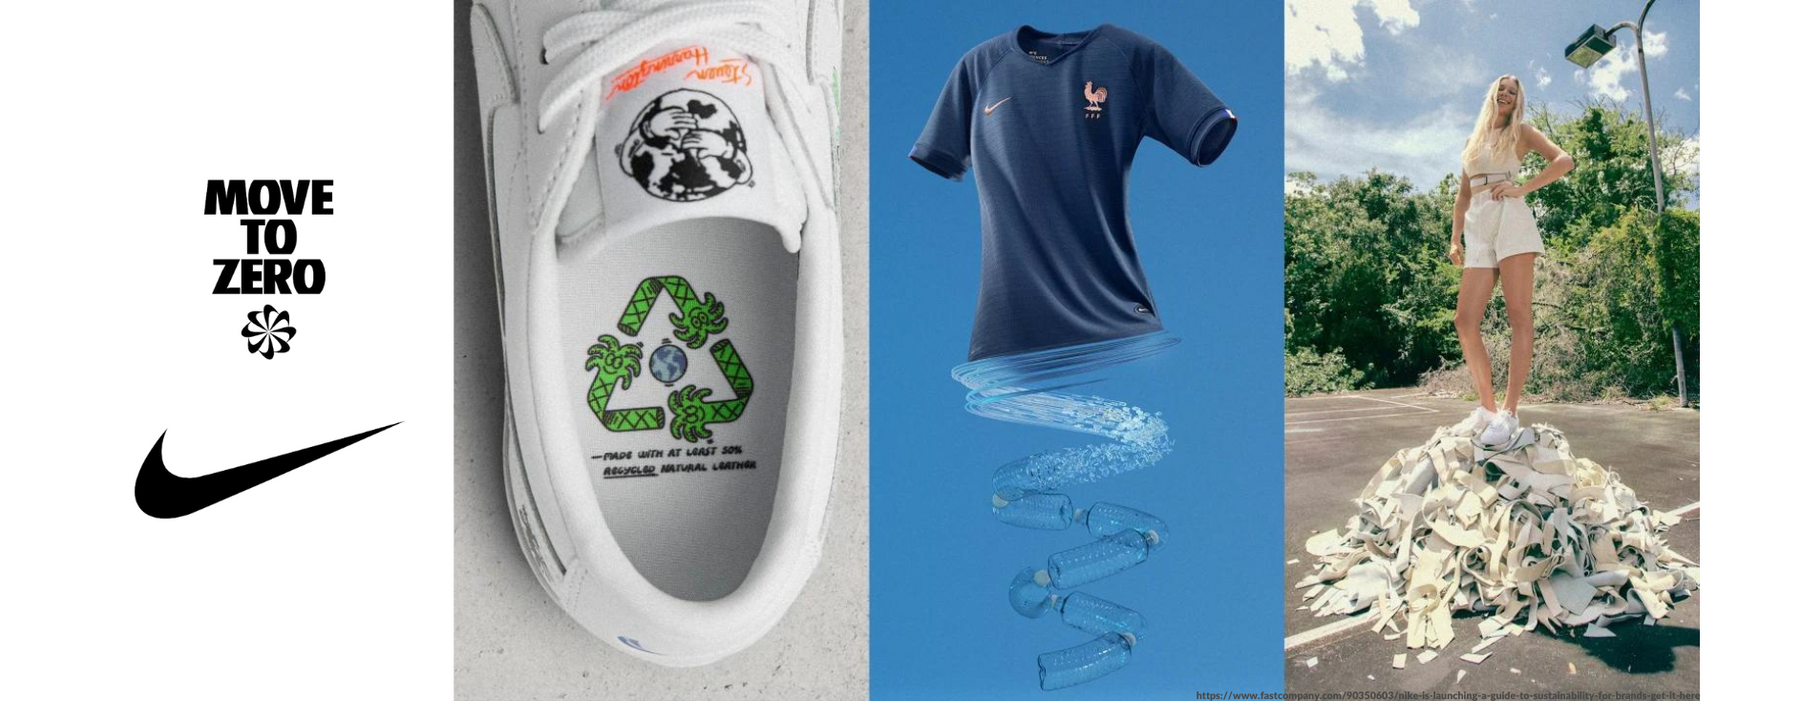 Circular Design Guide - Safeguarding the Future of Sports through Sustainable Innovations by Nike